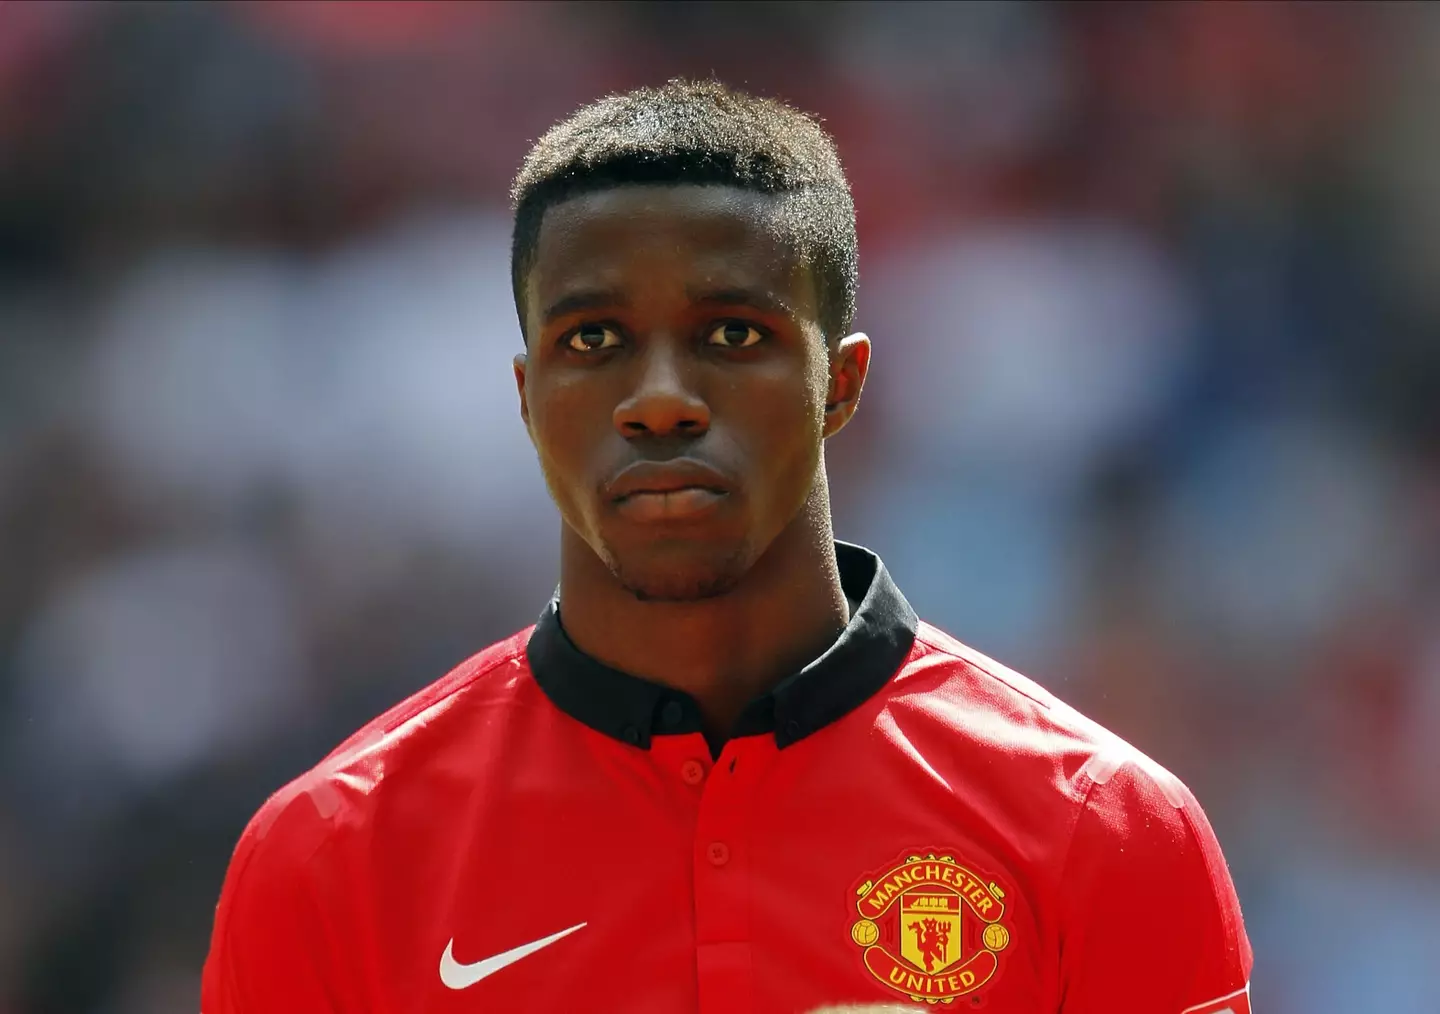 Zaha did win the Community Shield with United but his time at the club wasn't great. Image: Alamy